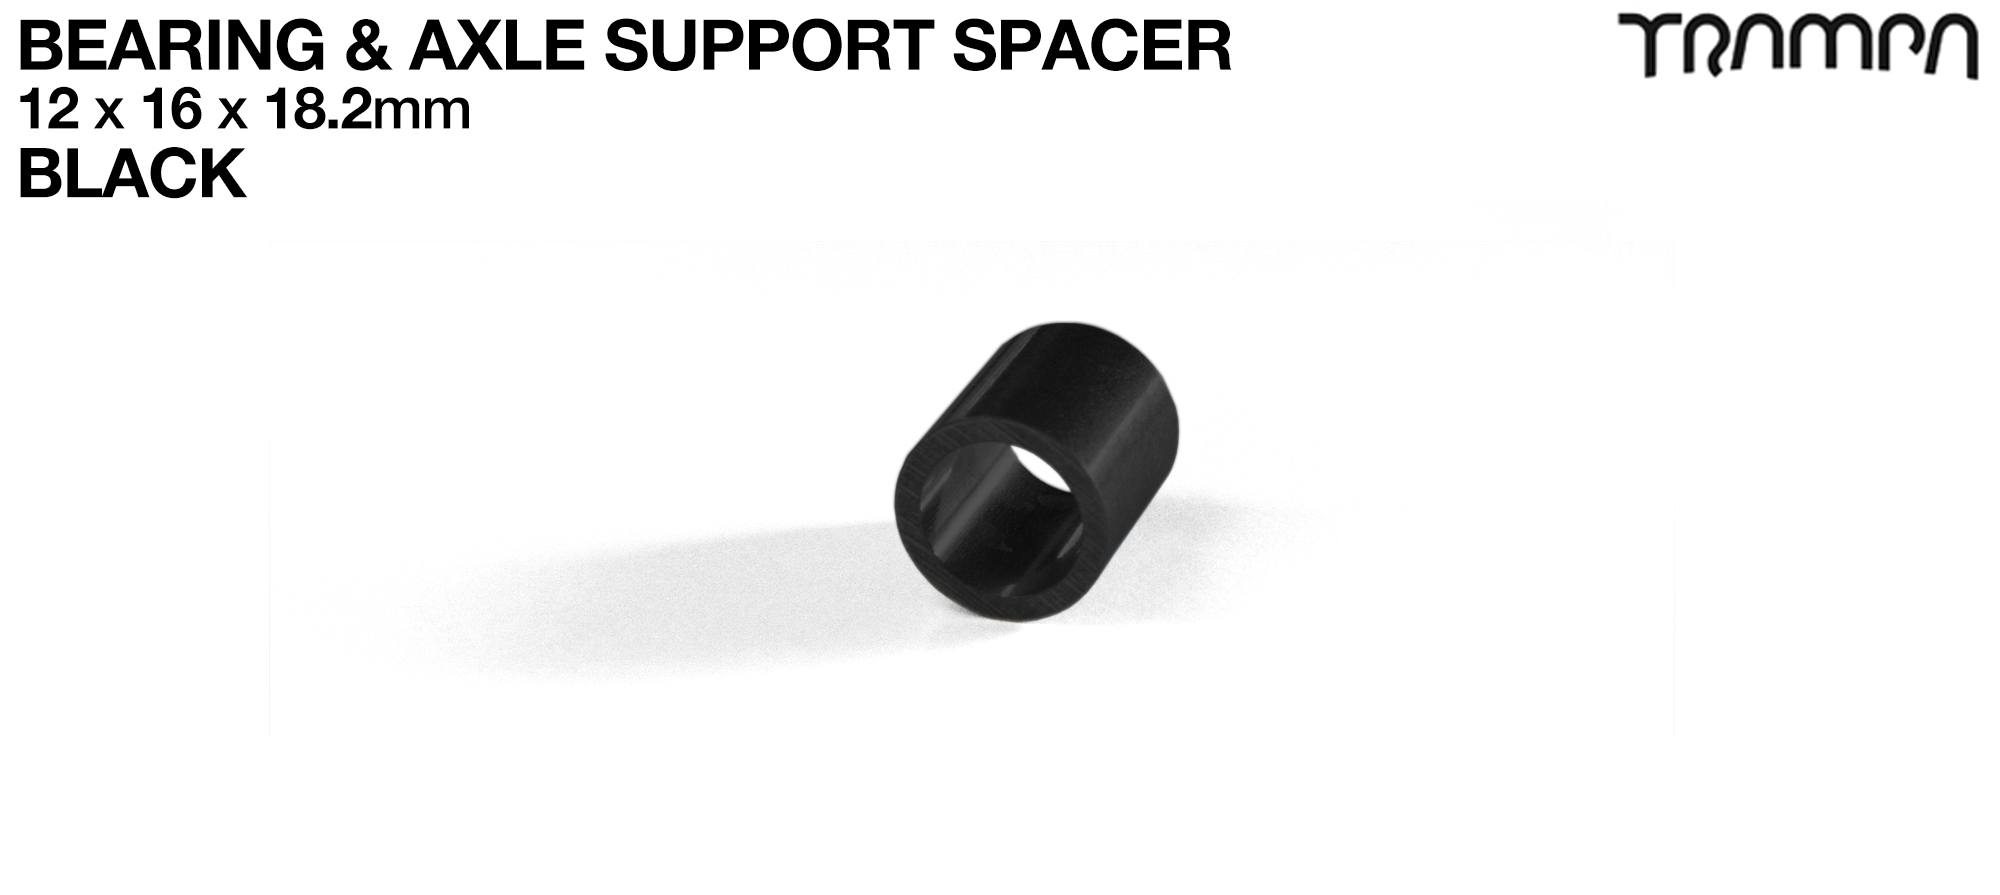 Wheel support spacer for all TRAMPA Wheels on 12mm ATB Axles - CNC precision 12mm x 16mm x 18.2mm - BLACK